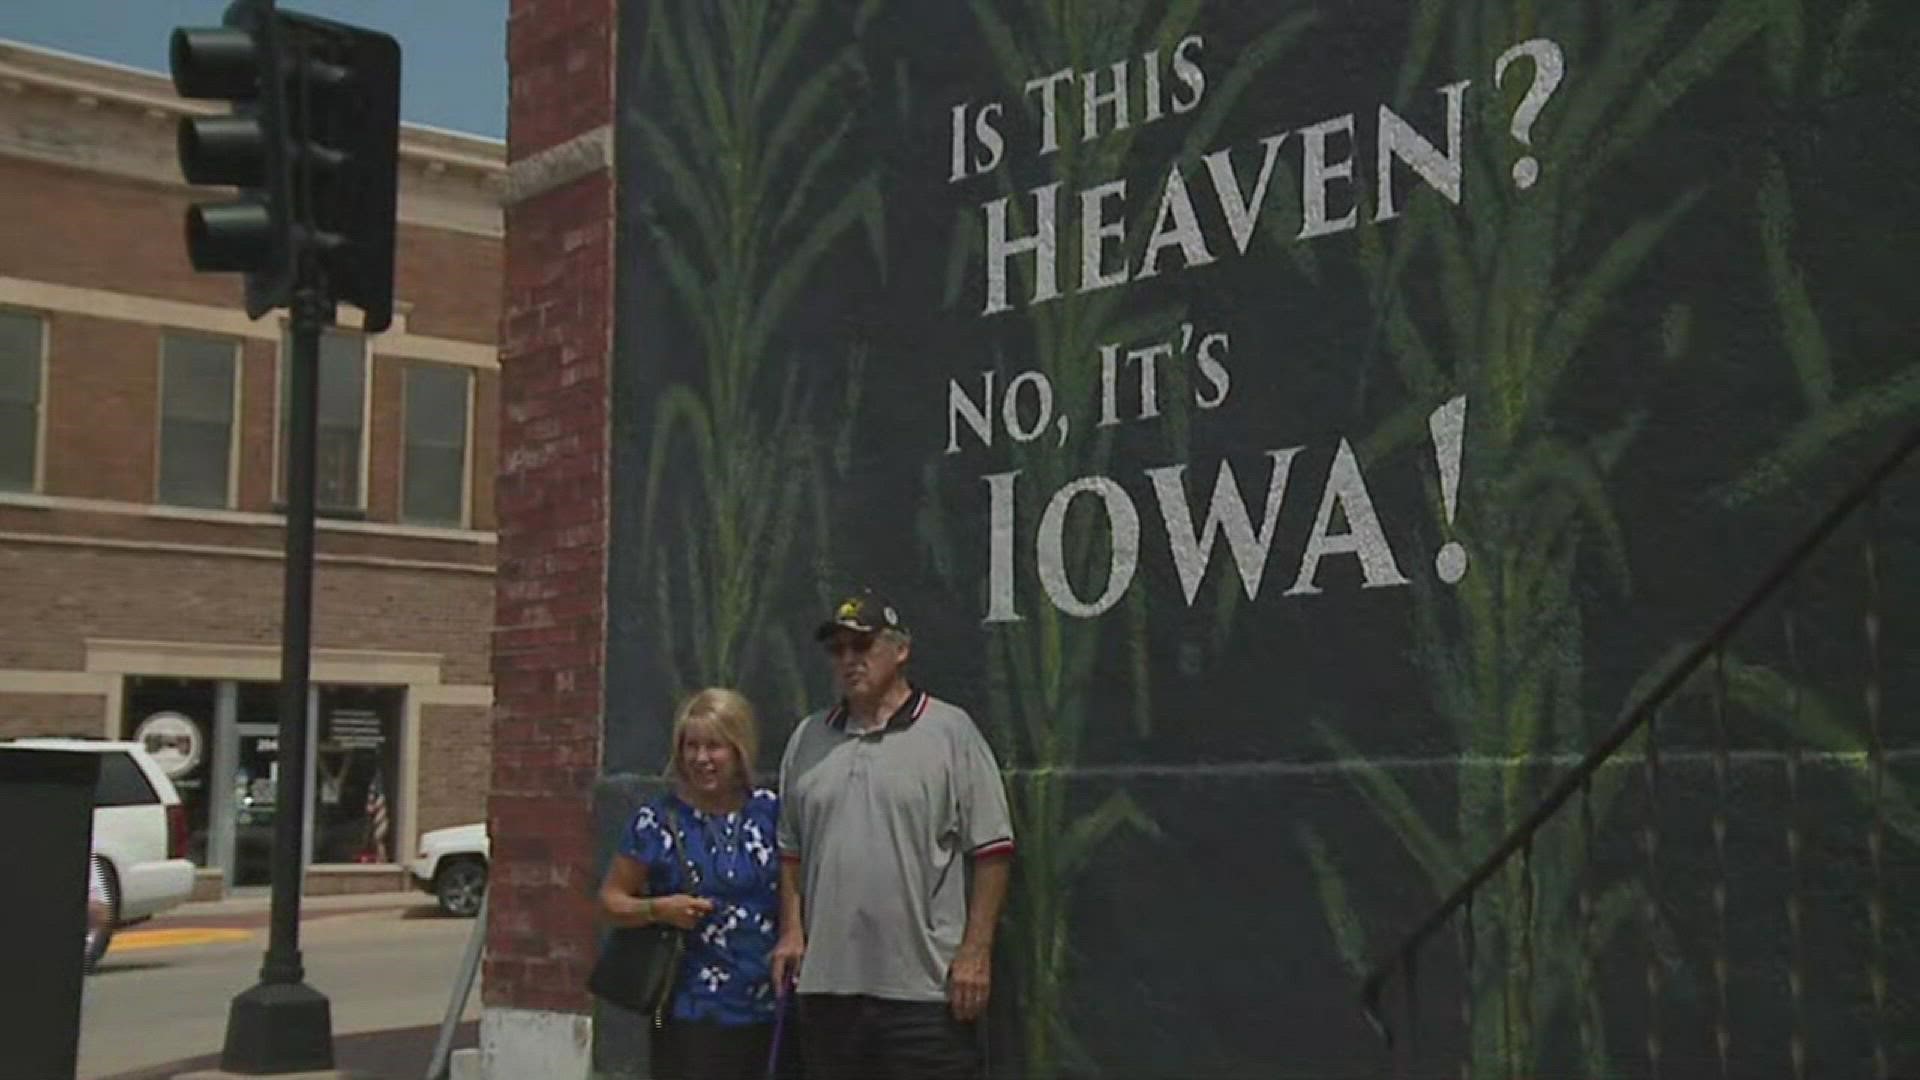 Fans spent the entire day exploring Dyersville before heading for the stadium